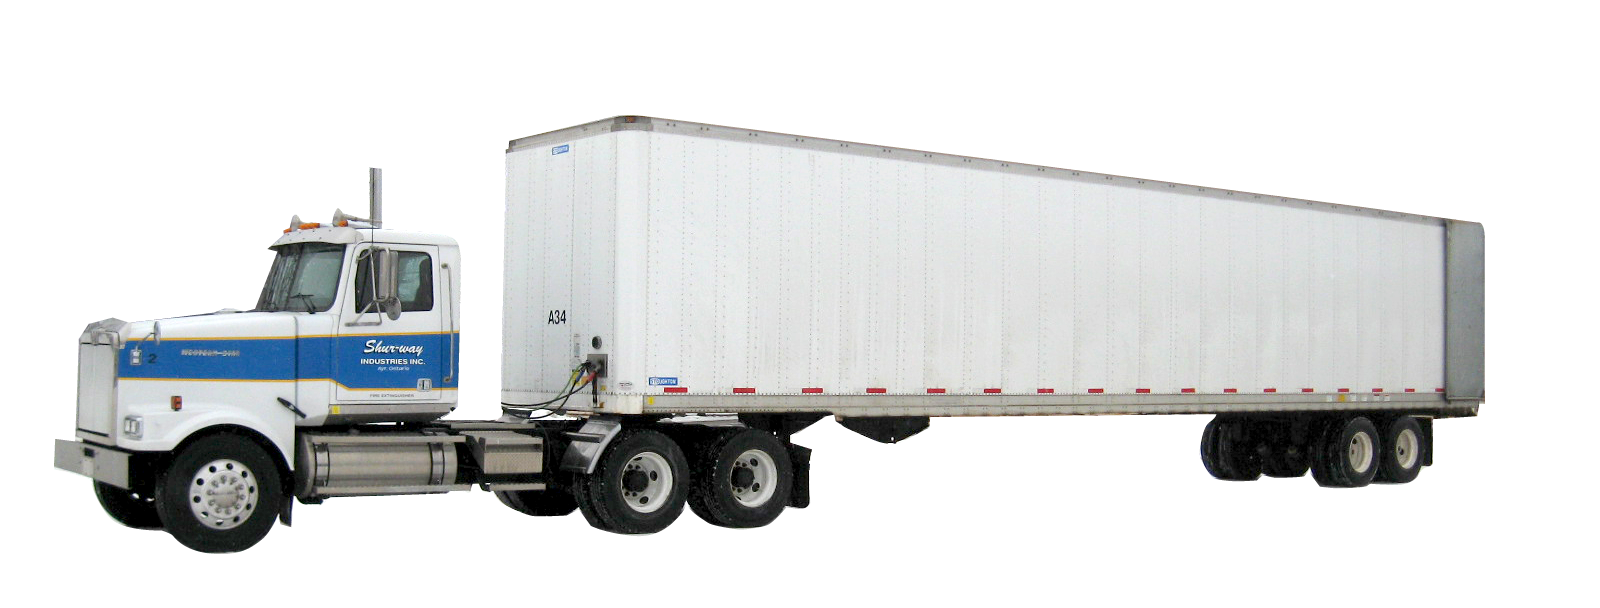 Truck Images Png